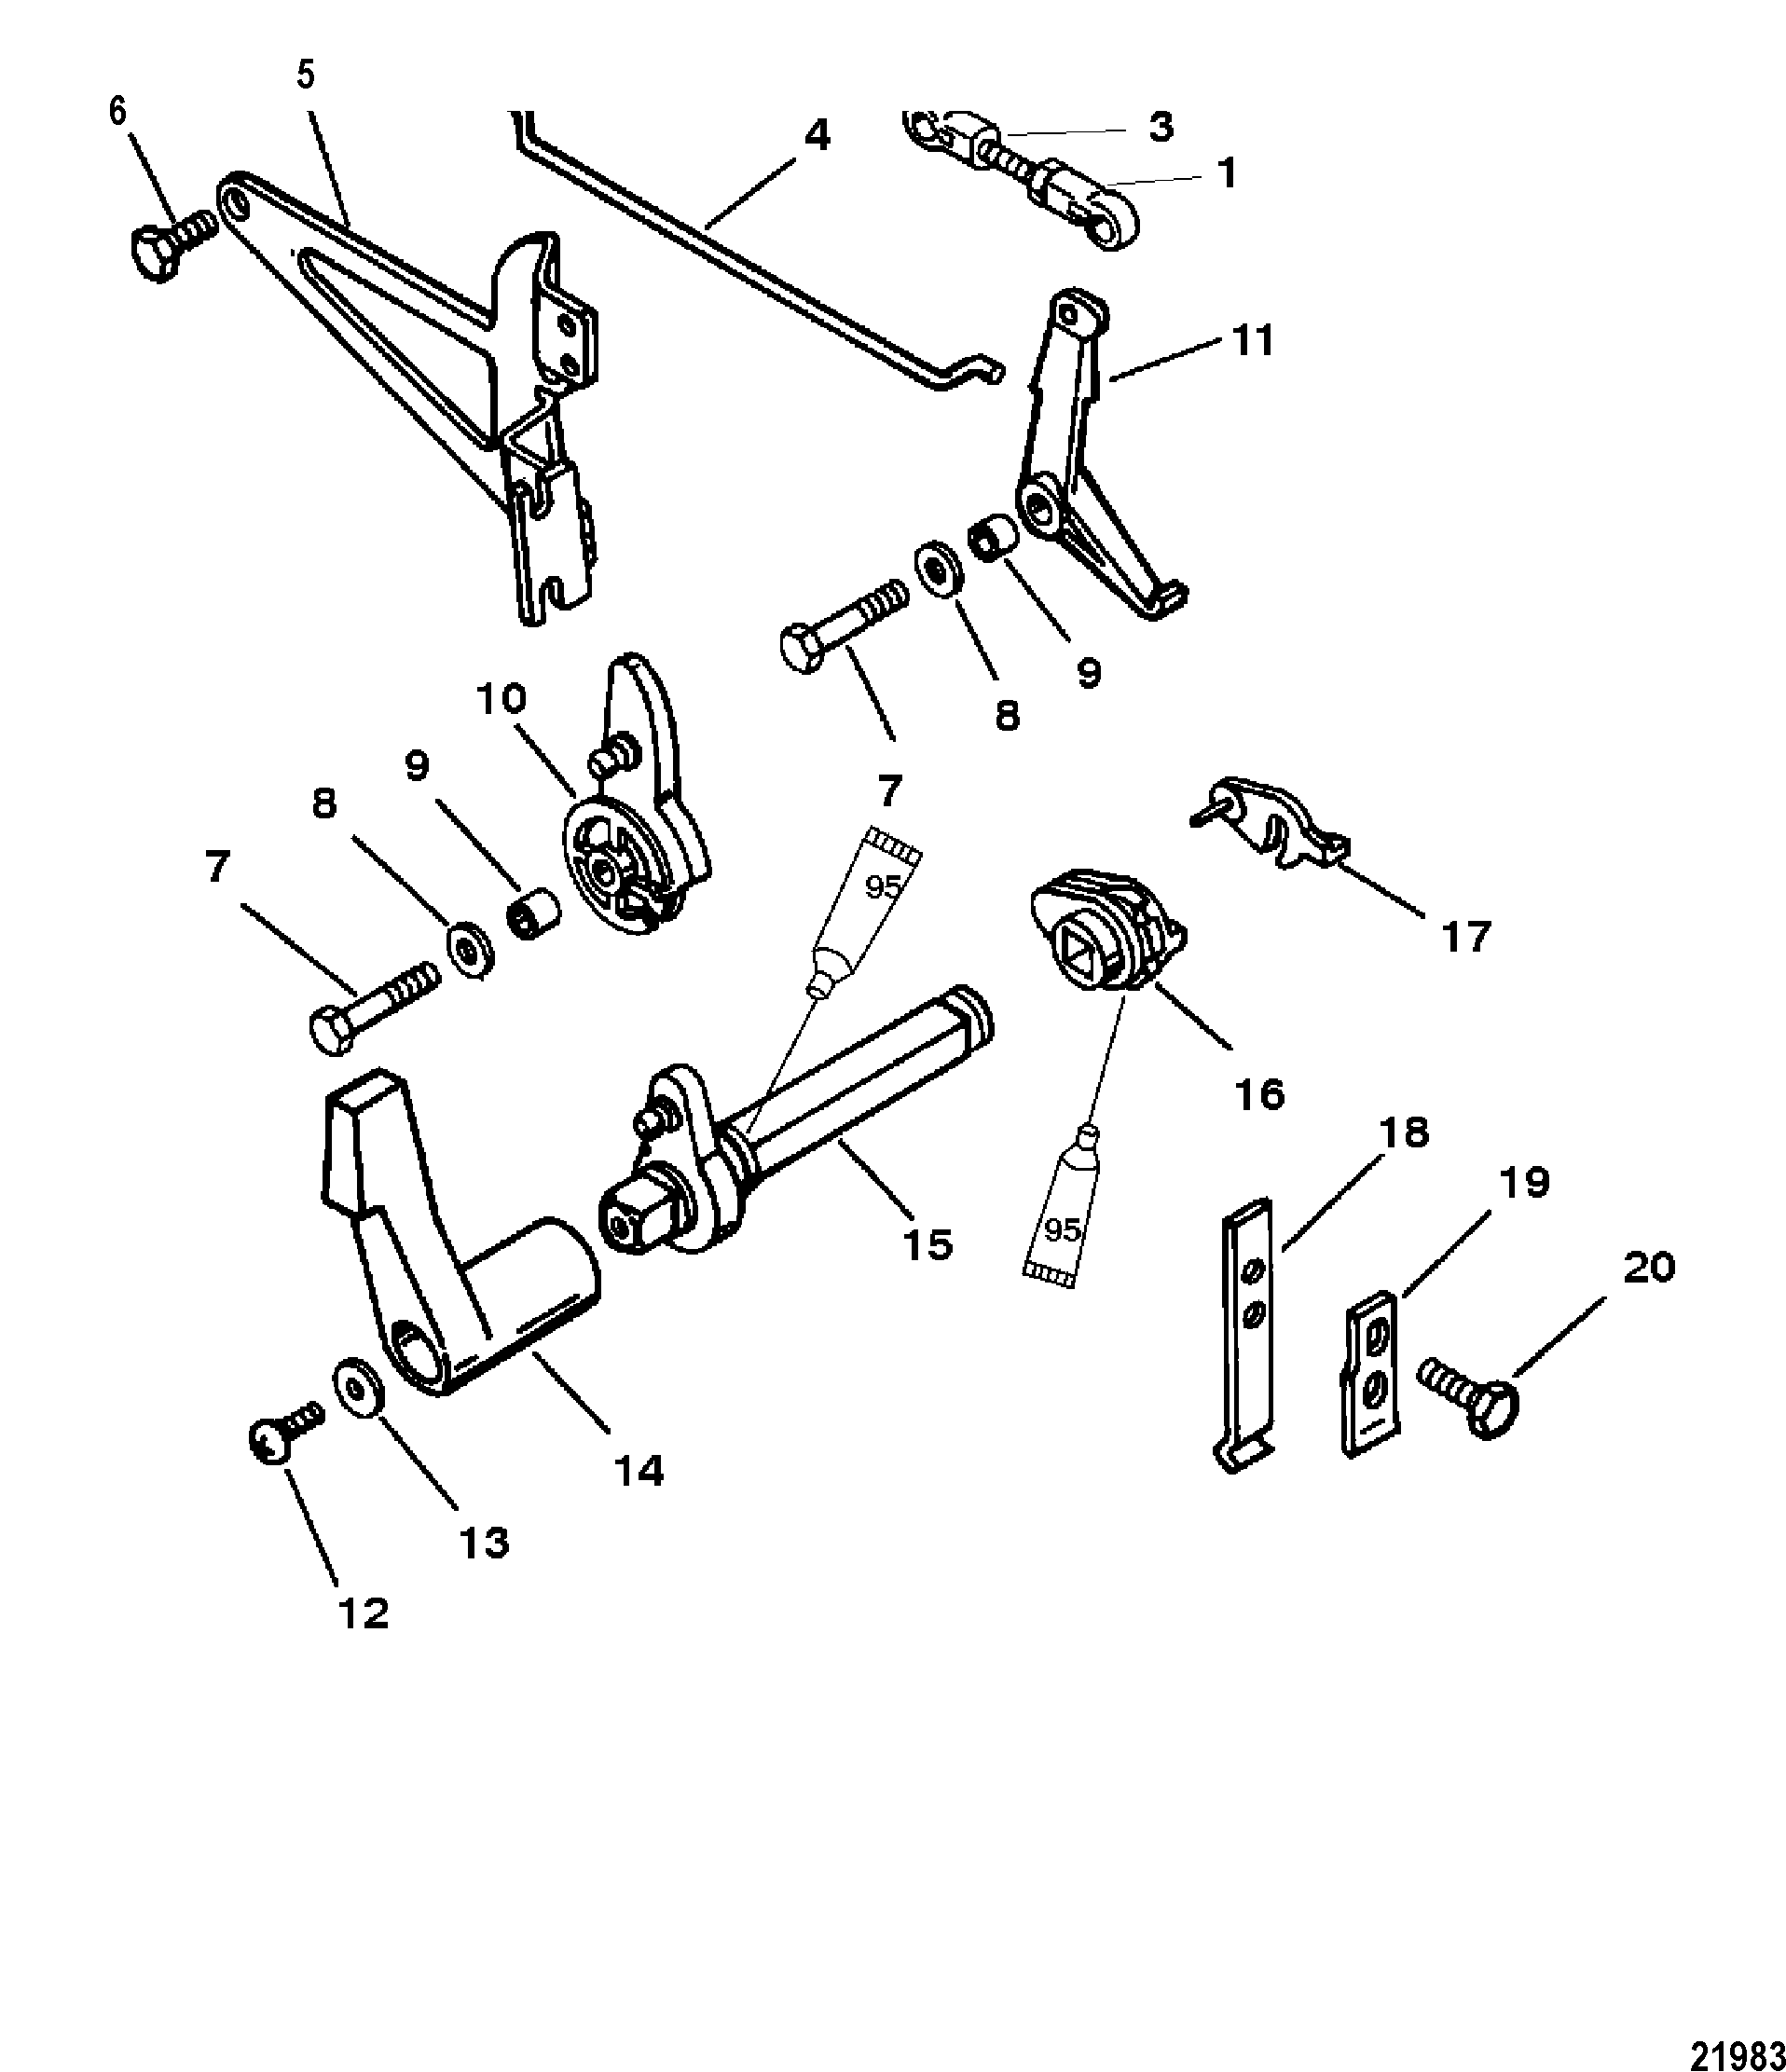 Throttle and Shift Linkage